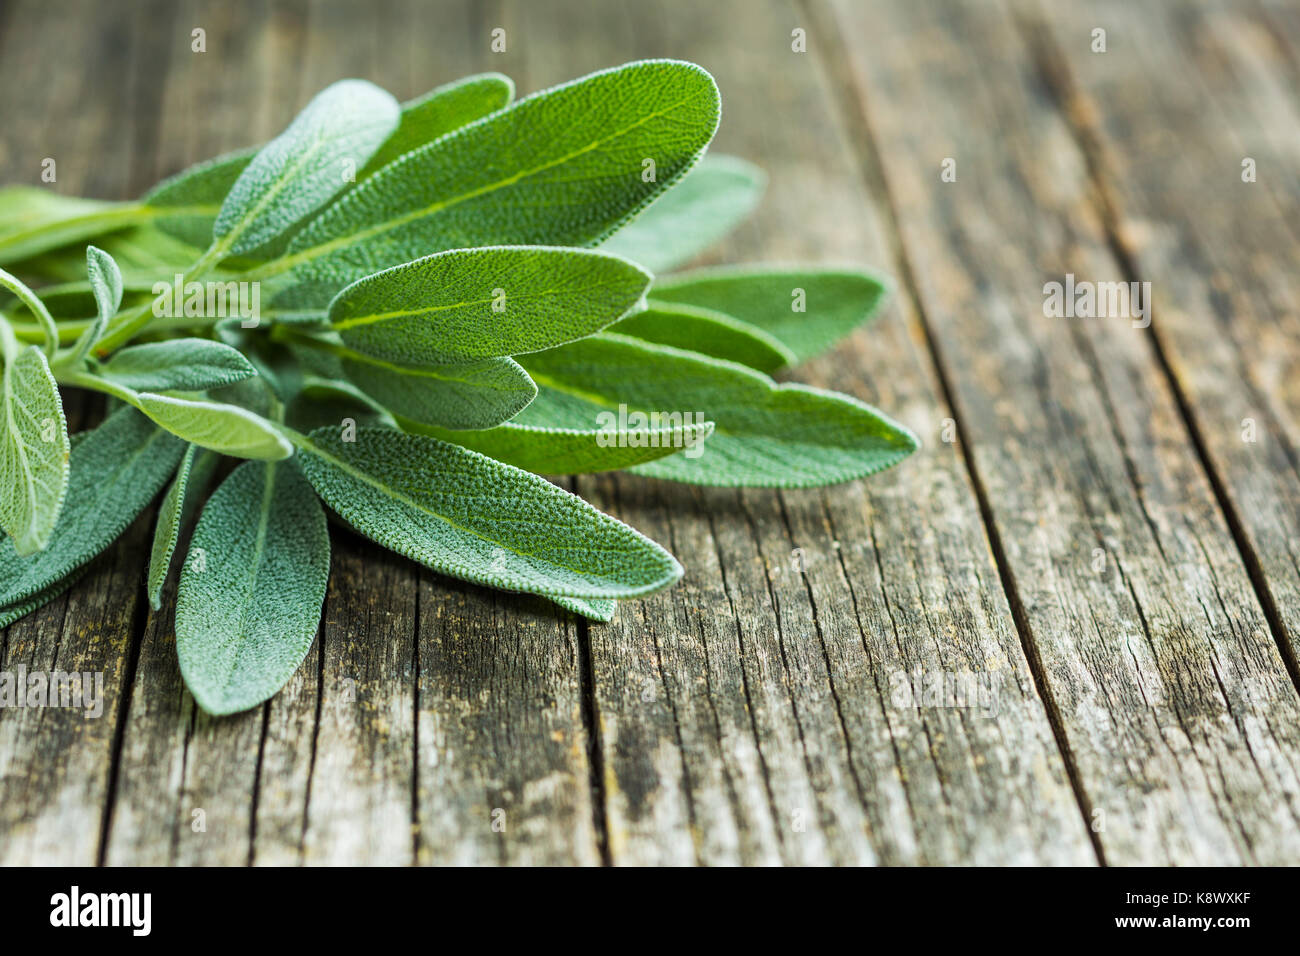 Salvia officinalis. Sage leaves on old wooden table. Garden sage. Stock Photo